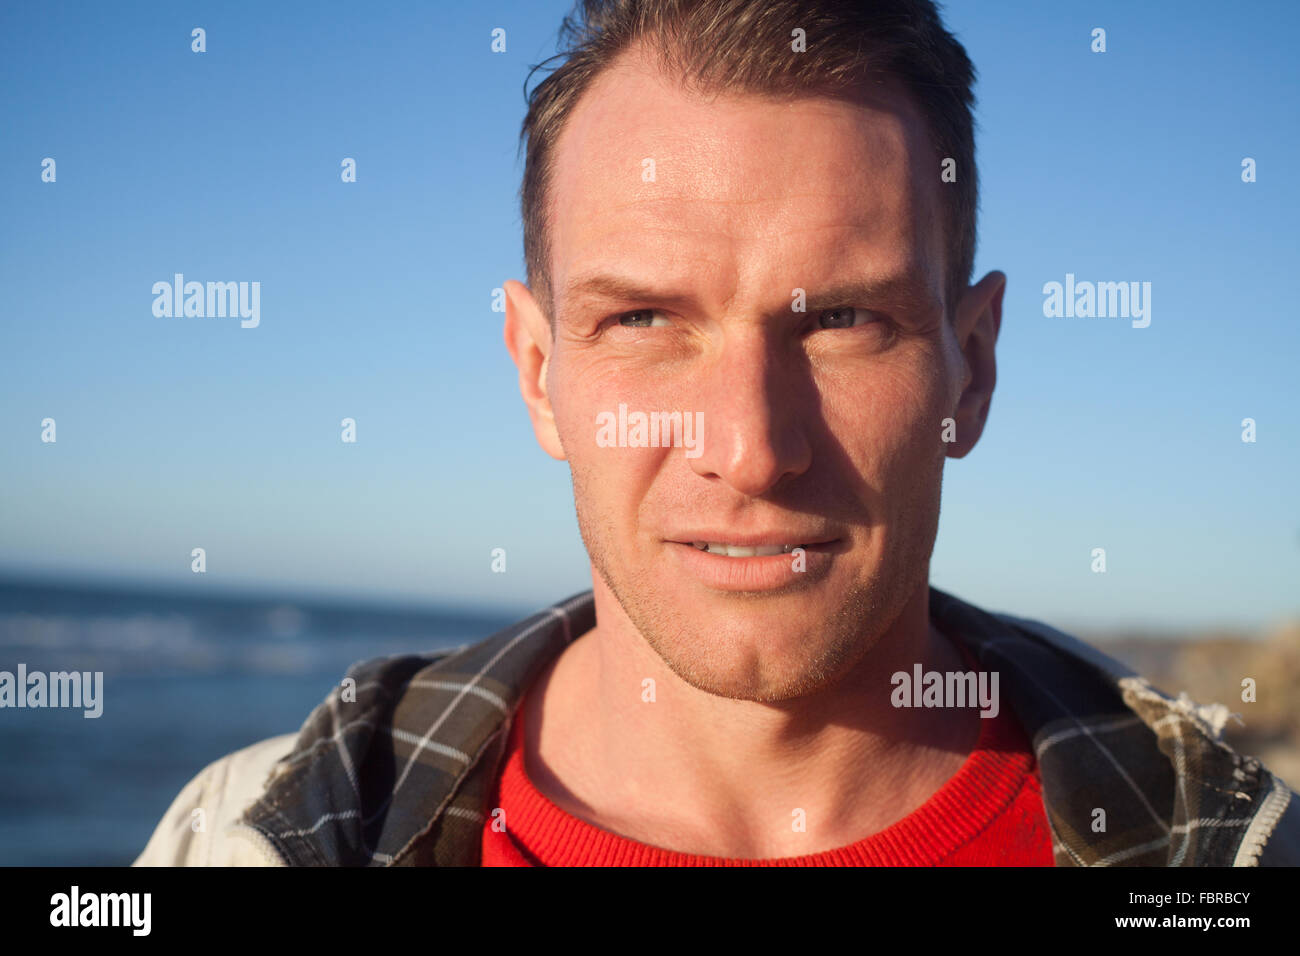 Strong man portrait, sea and blue sky Stock Photo